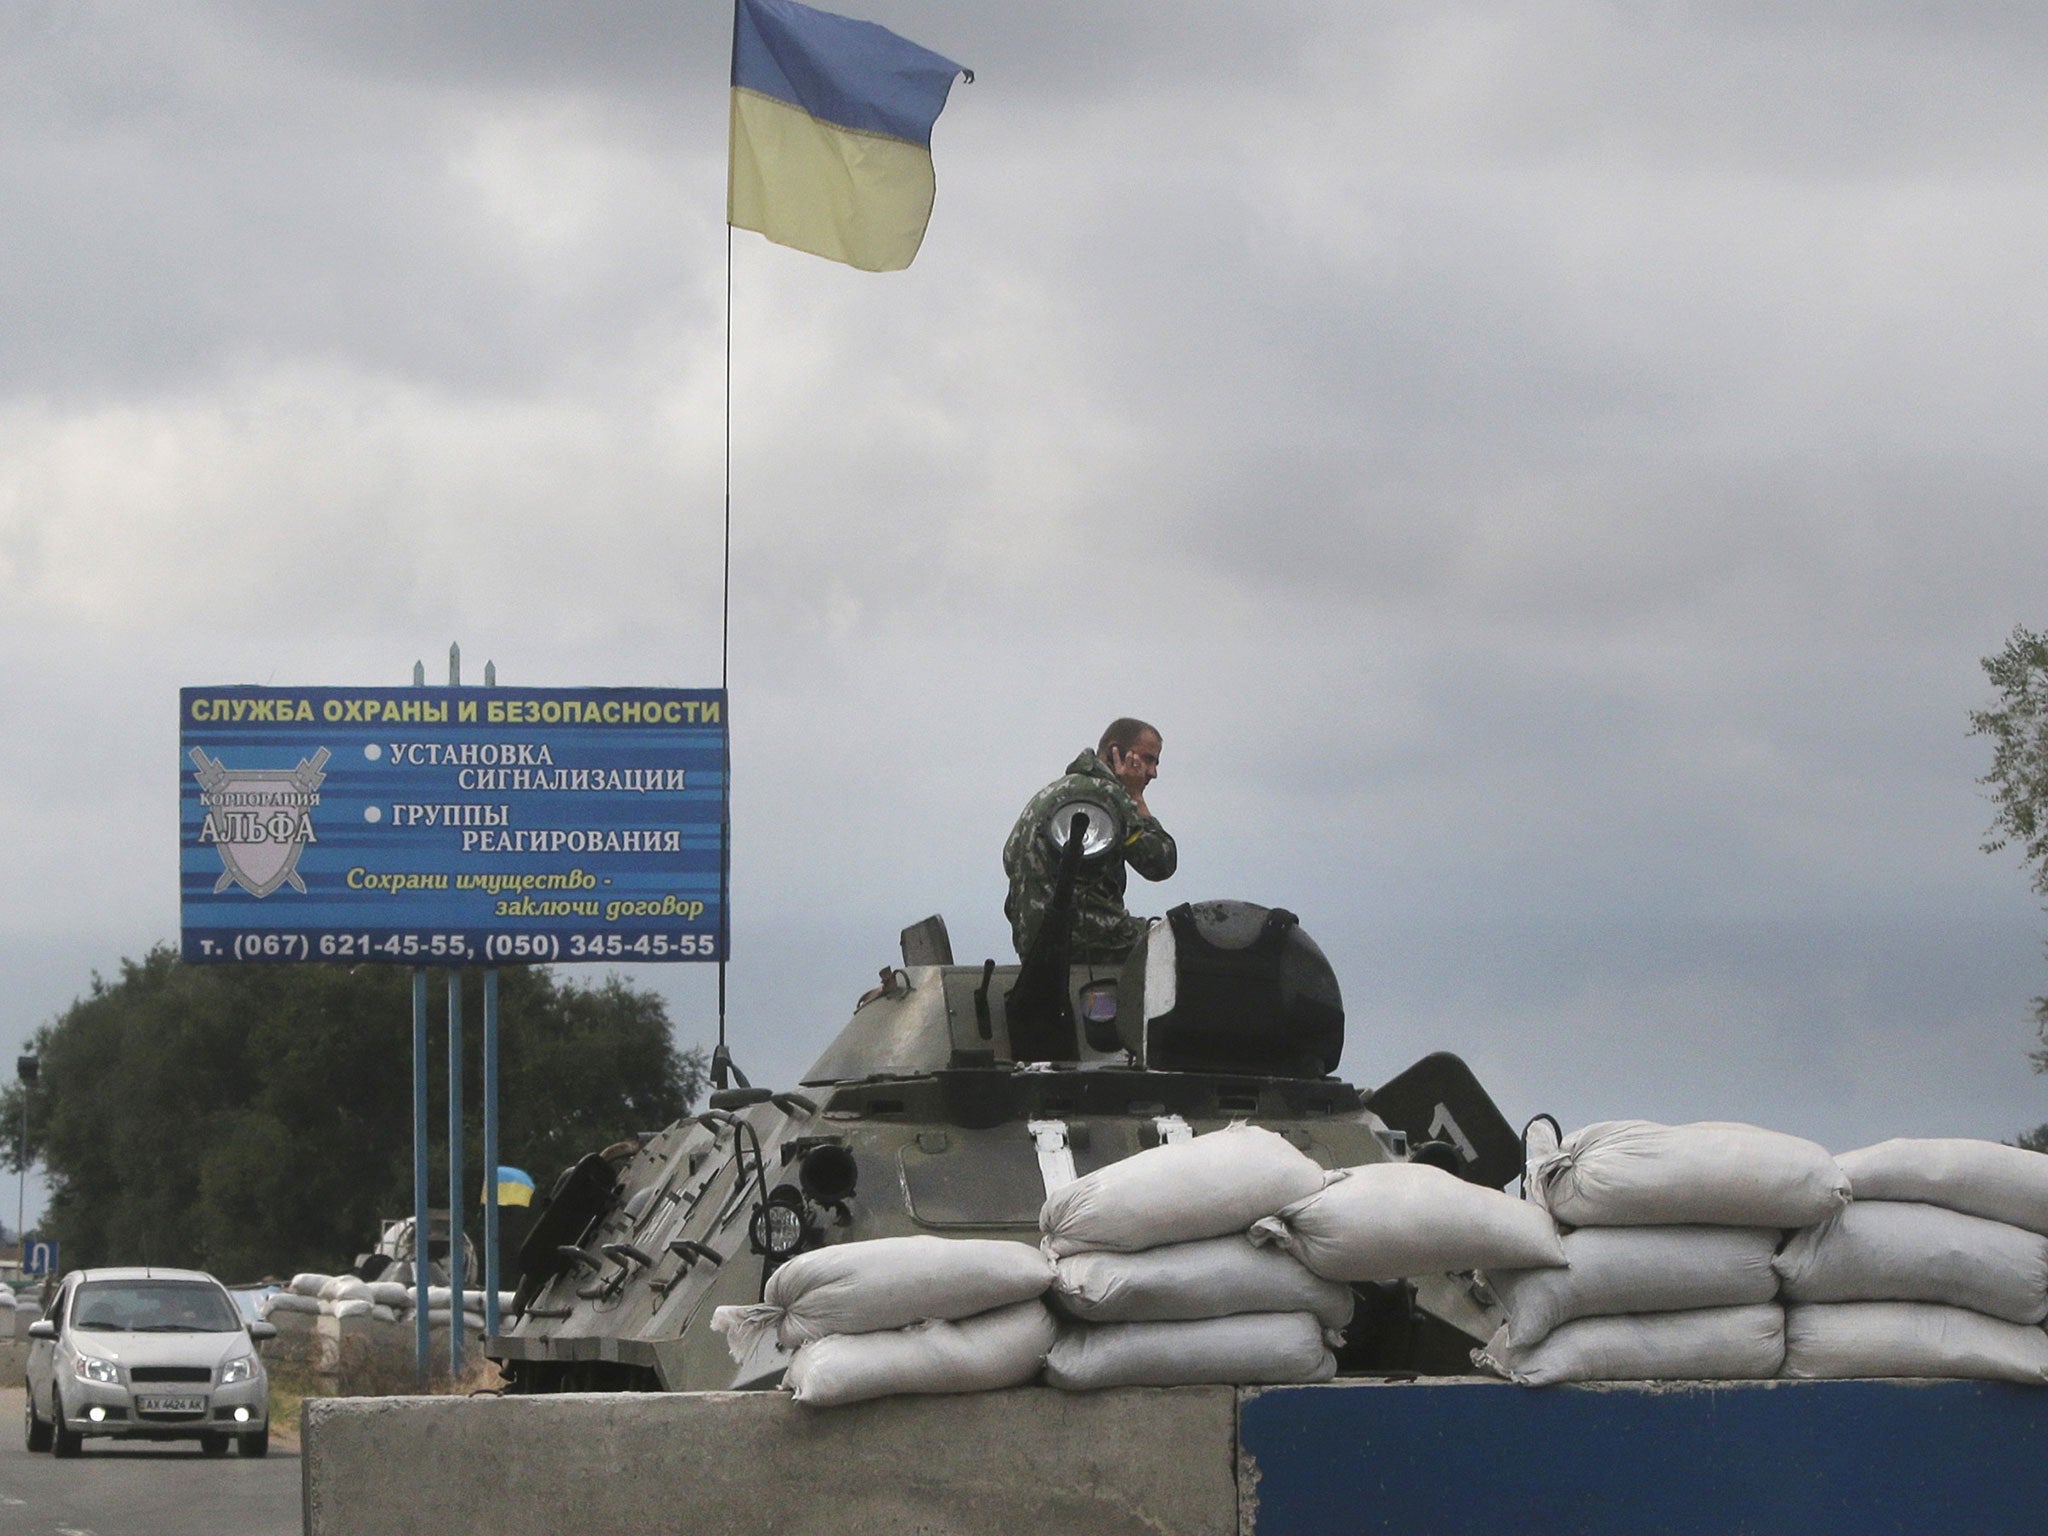 Ukrainian forces guard a checkpoint in the town of Mariupol, eastern Ukraine, which pro-Russian separatists claim is a major target in their rebellion against the government